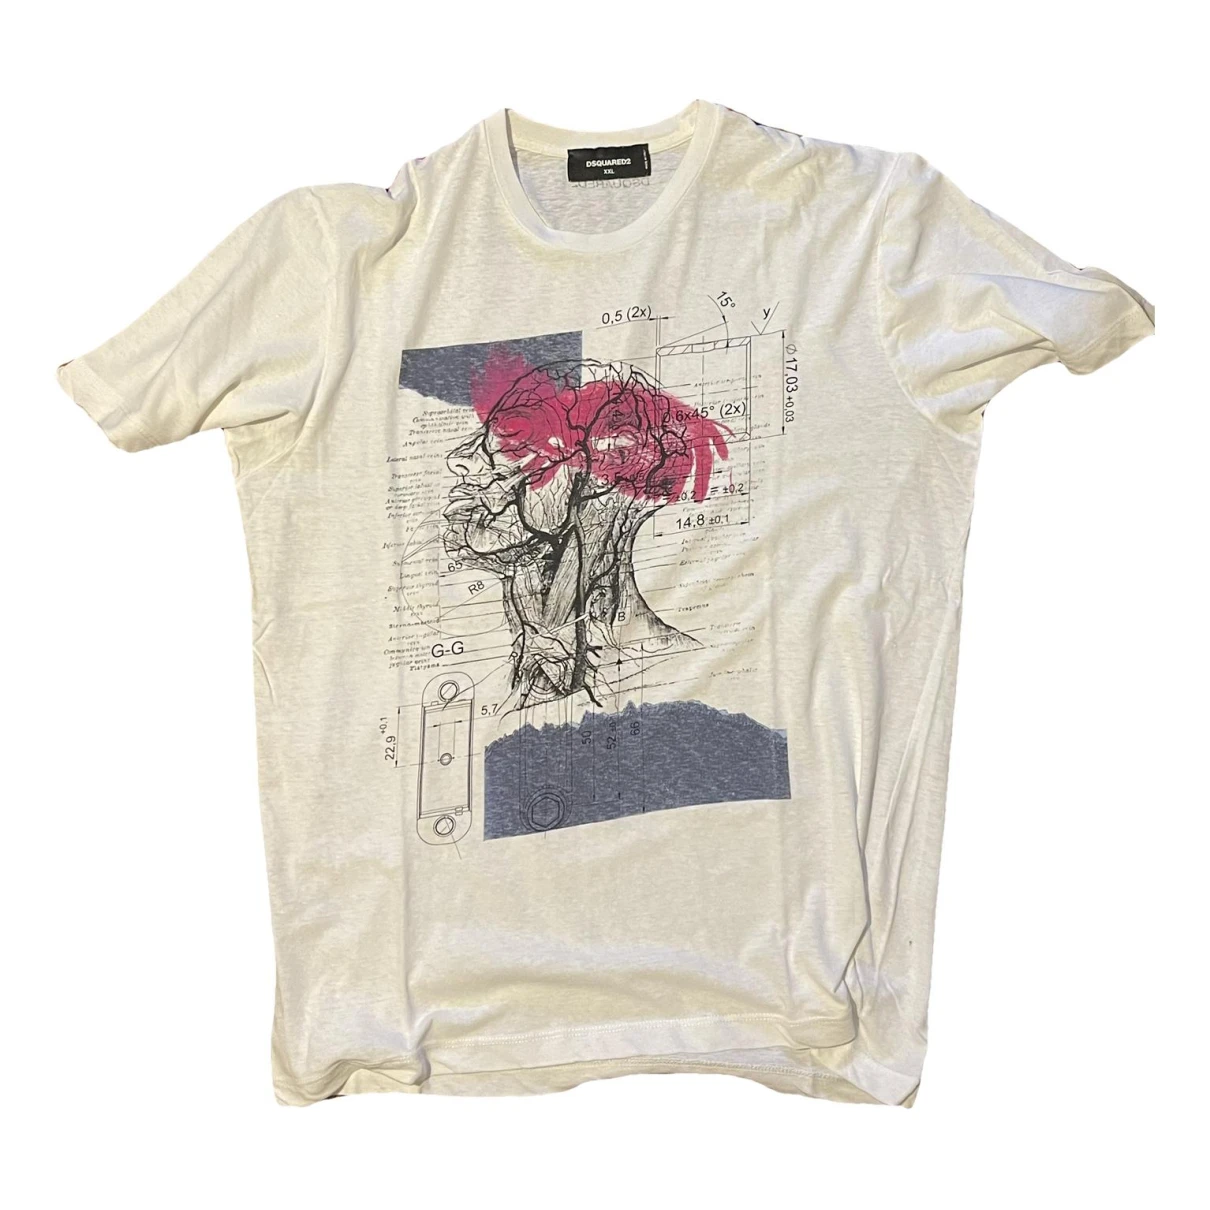 Pre-owned Dsquared2 T-shirt In White